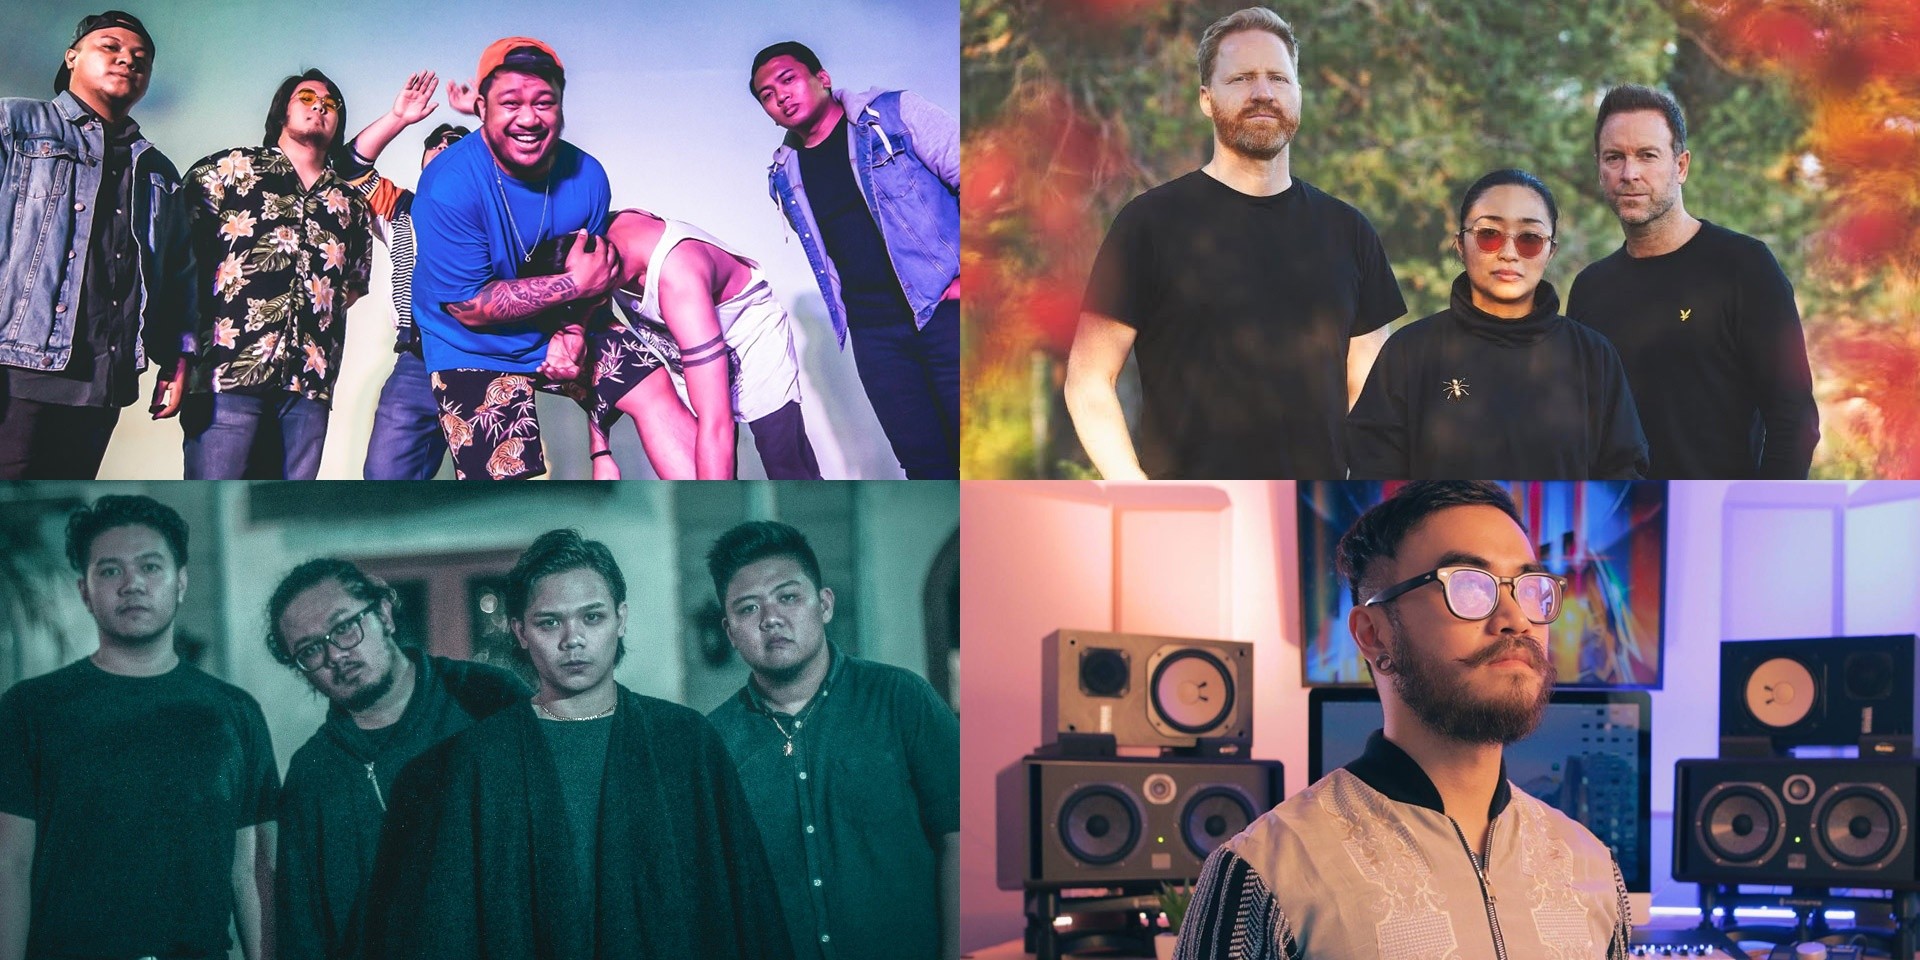 The Metro Fantastic, Armi Millare & D'Sound, St. Wolf, DJ Joey Santos, and more release new music